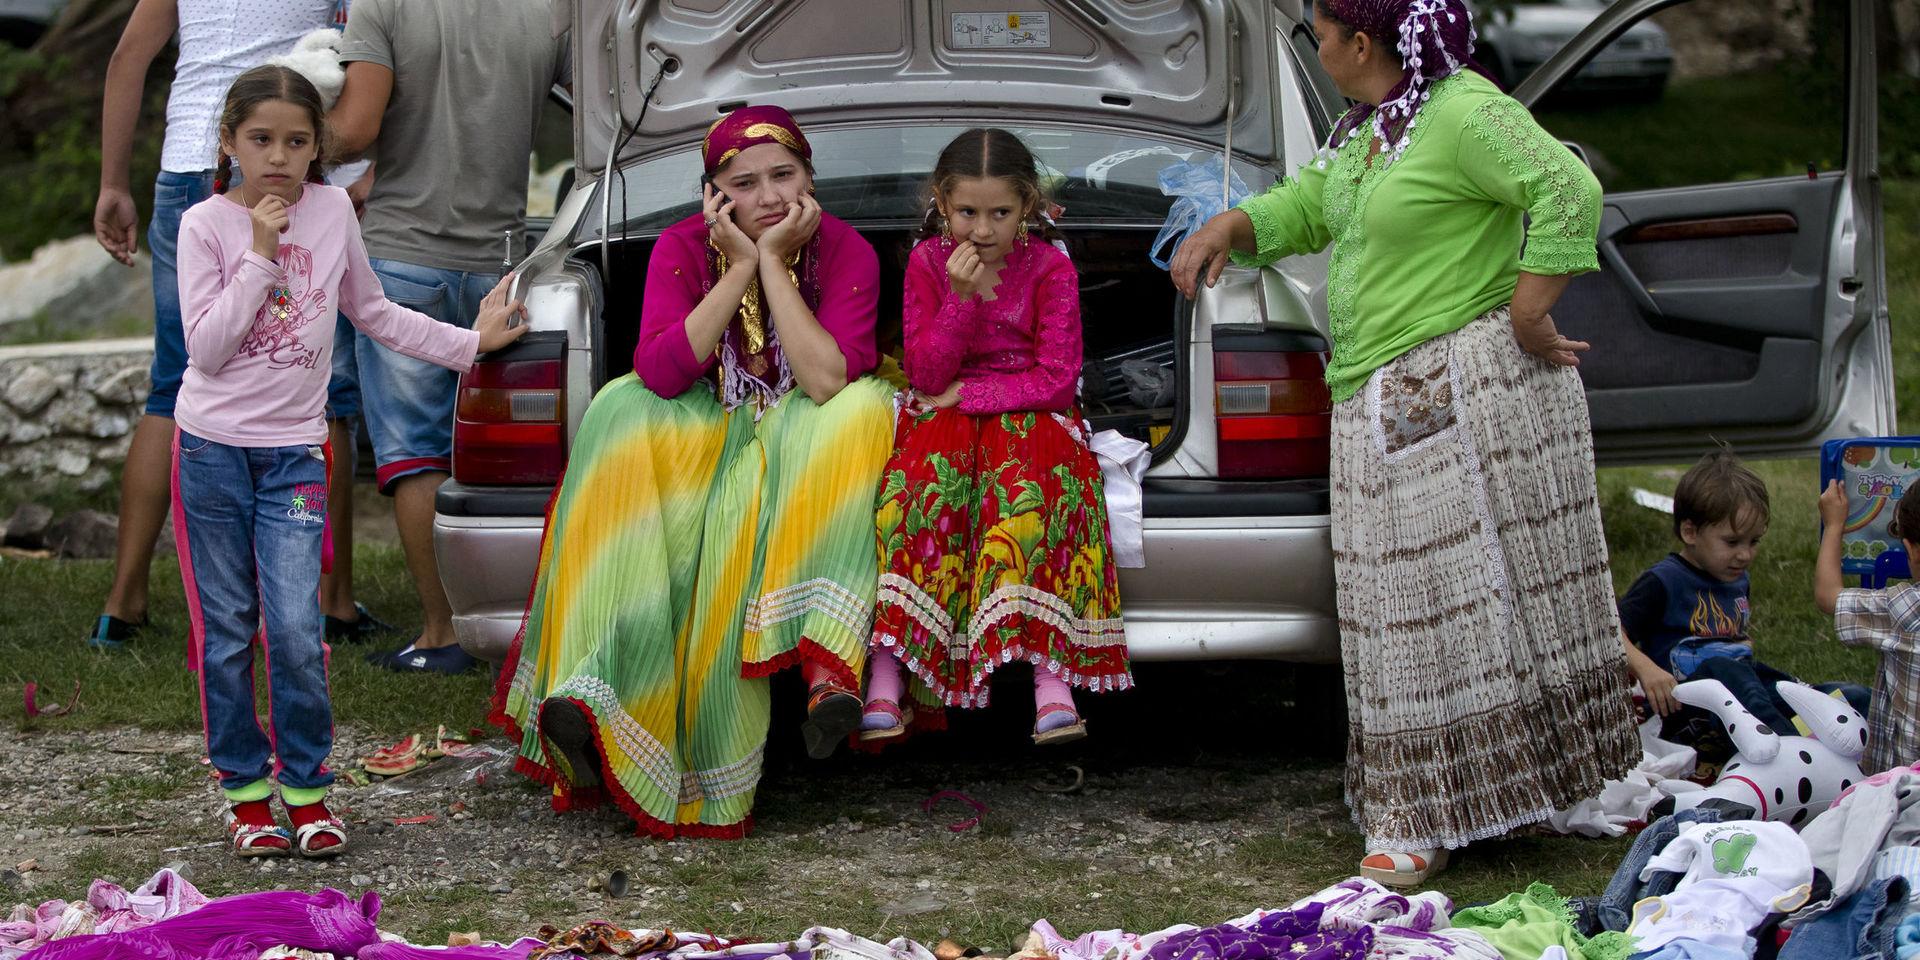 A Roma family waits for customers for traditional skirts as the Roma community celebrates the Birth of the Virgin Mary in Costesti, Romania, Monday, Sept. 8, 2014. Thousands of Gypsies or Roma gather on a hillside after attending a religious service in a nearby monastery and celebrate the religious holiday by sharing food and playing traditional music until the next dawn. (AP Photo/Vadim Ghirda) / TT / kod 436